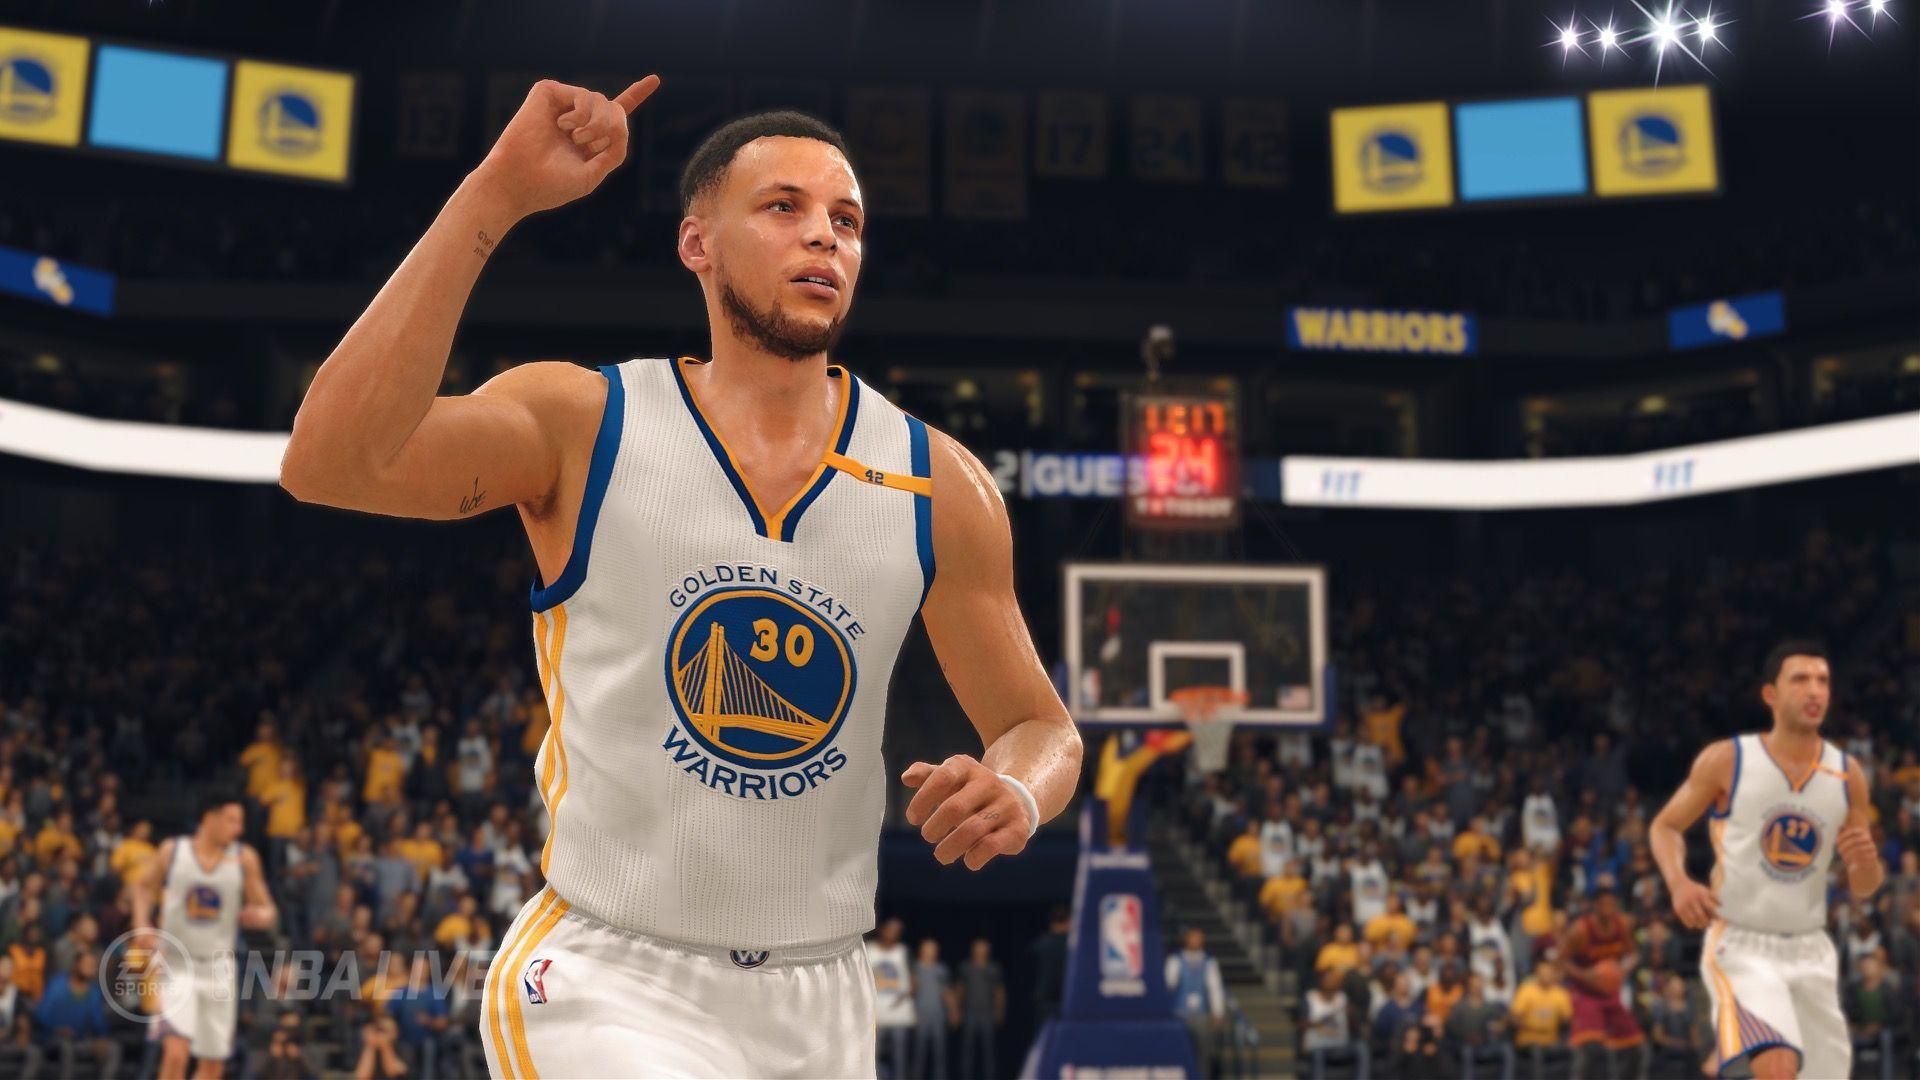 Ea Planning For Ps5 As It Cans Nba Live Push Square